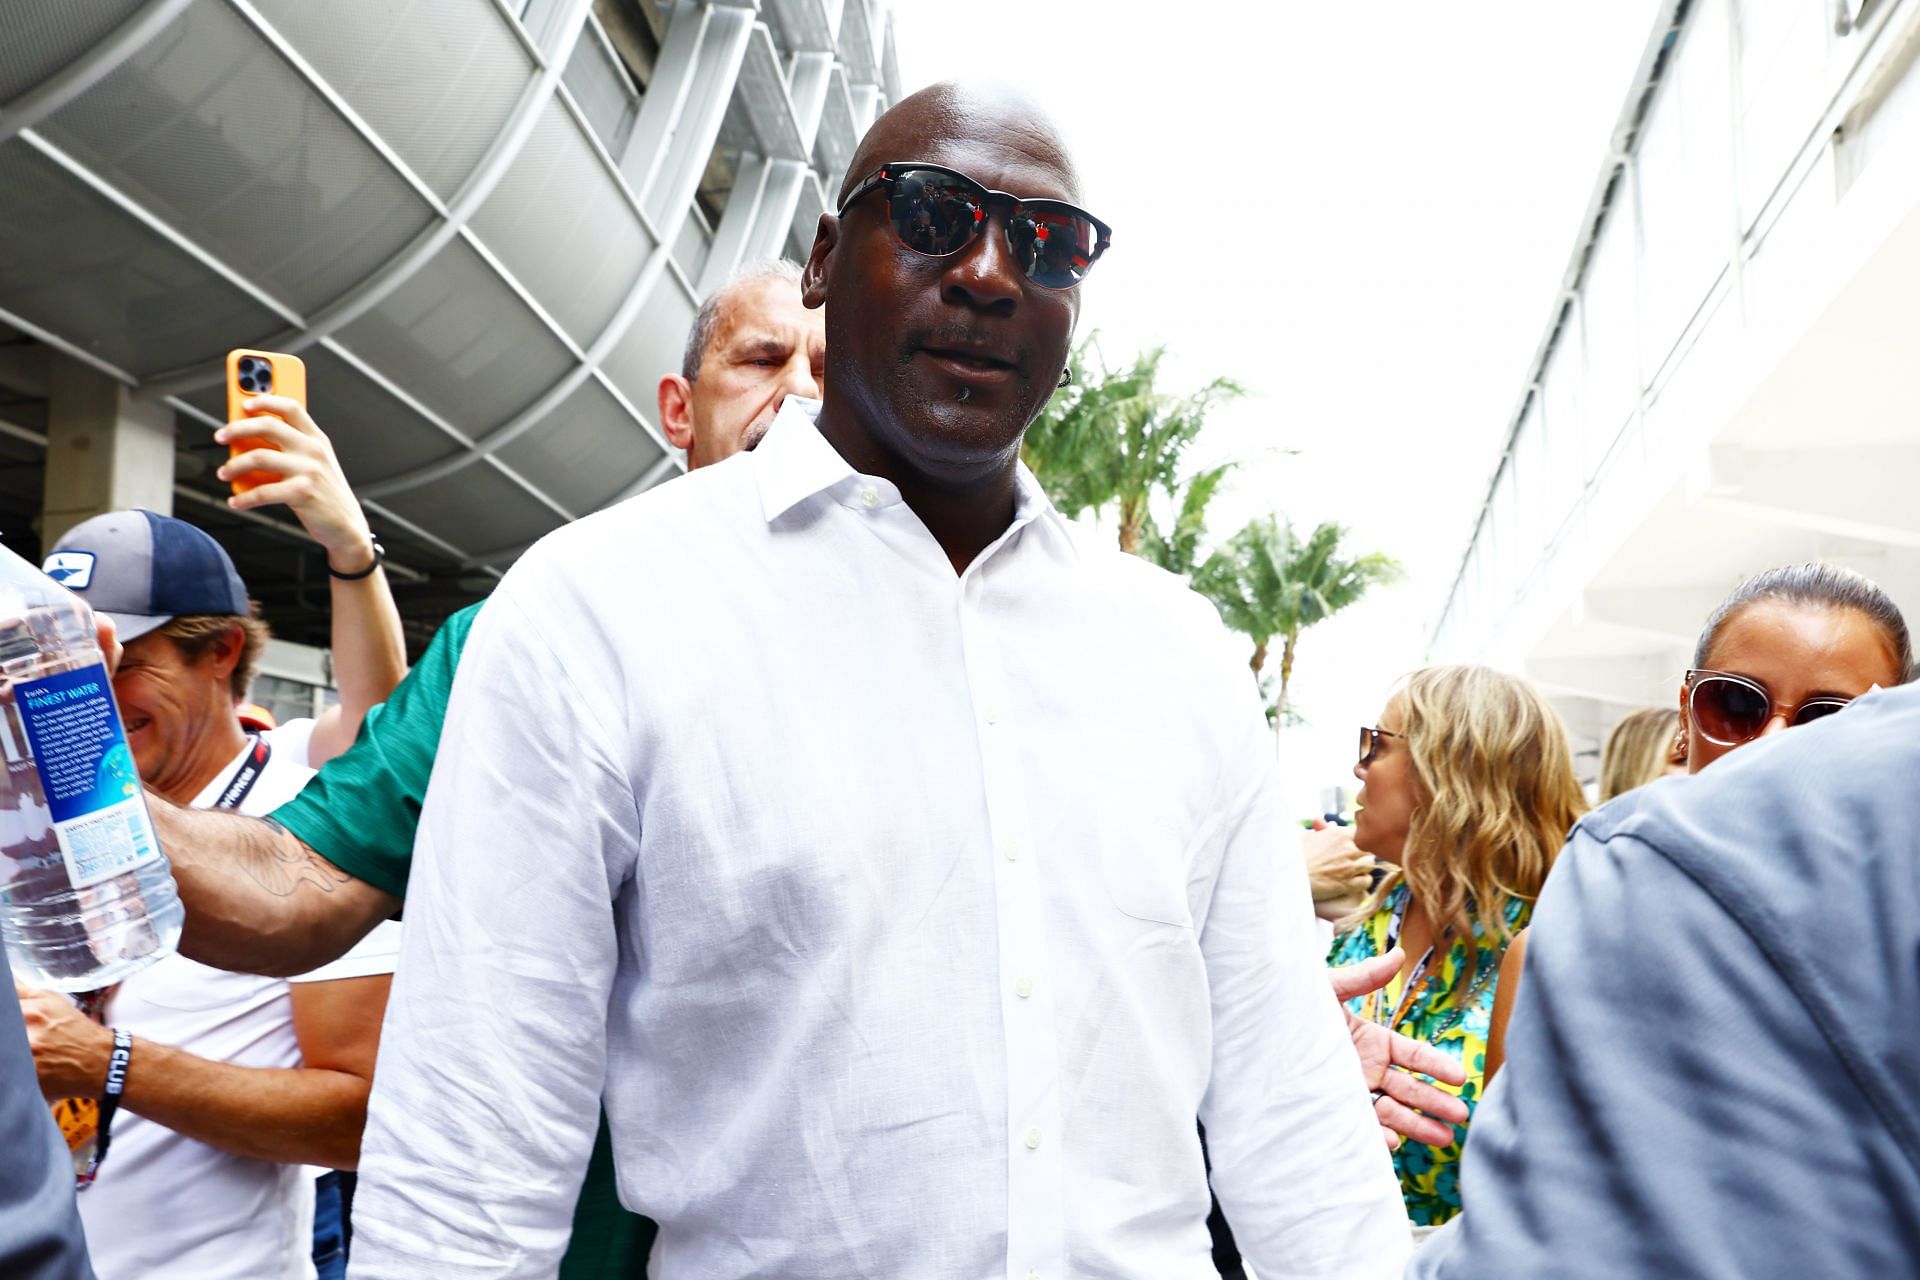 Today's record-breaking result solidifies Michael Jordan as the undisputed  G.O.A.T - Michael Jordan-worn jersey from 1998 NBA Finals sets record for  highest auctioned sporting memorabilia